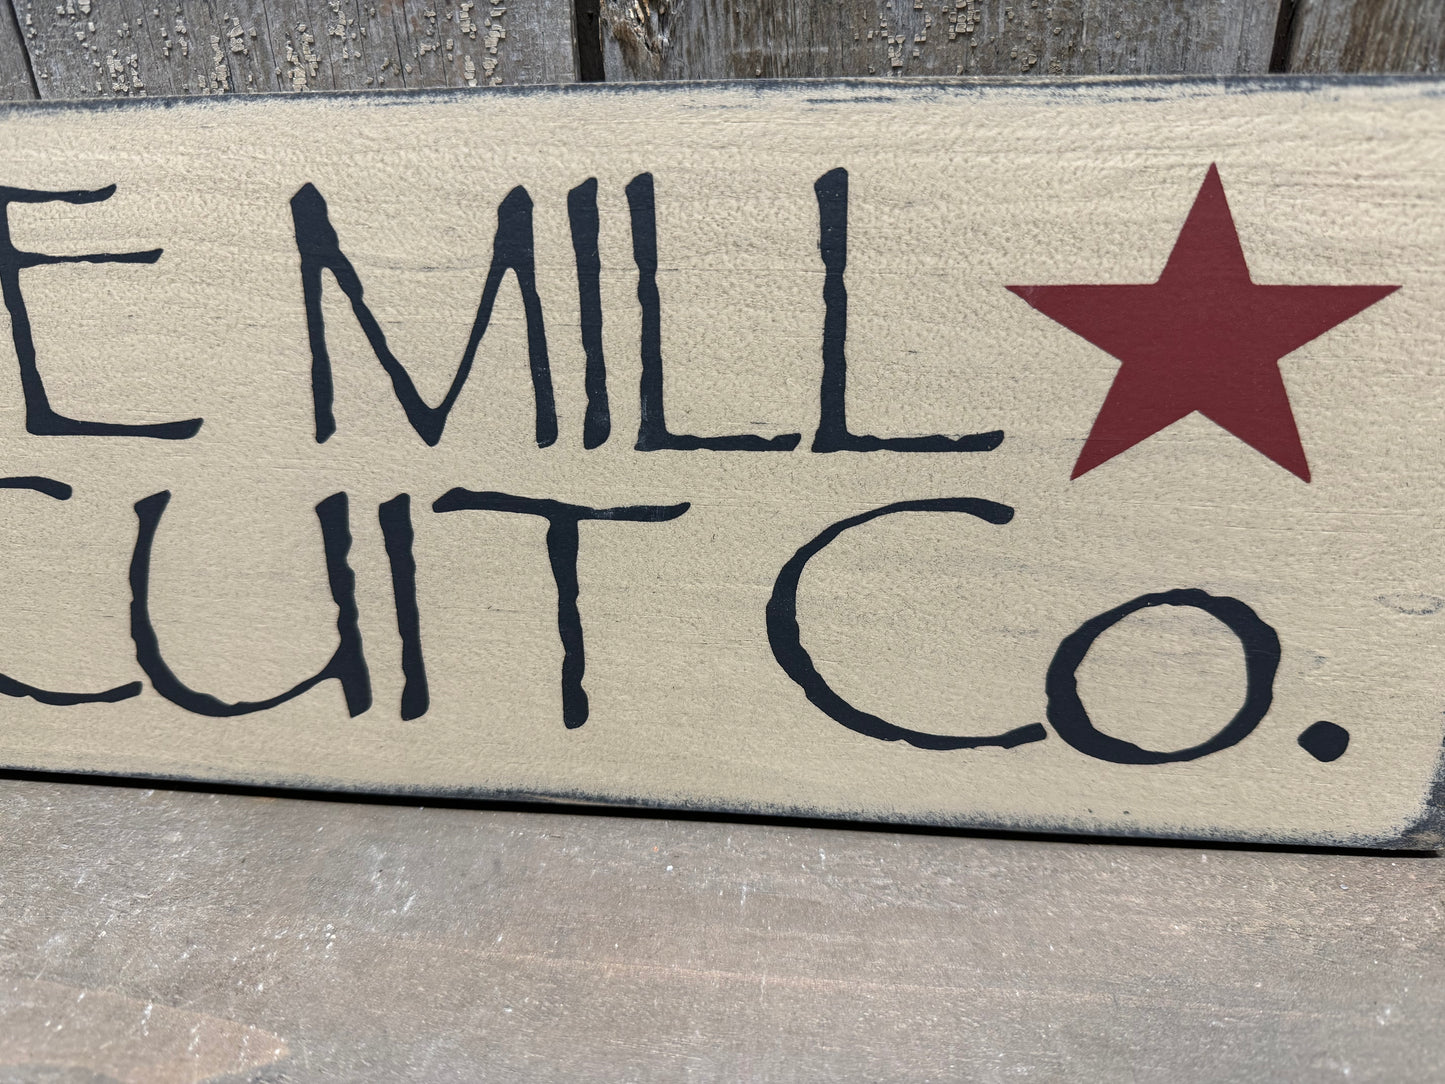 Sign, 18"x 5 1/2", OLDE MILL BISCUIT CO.